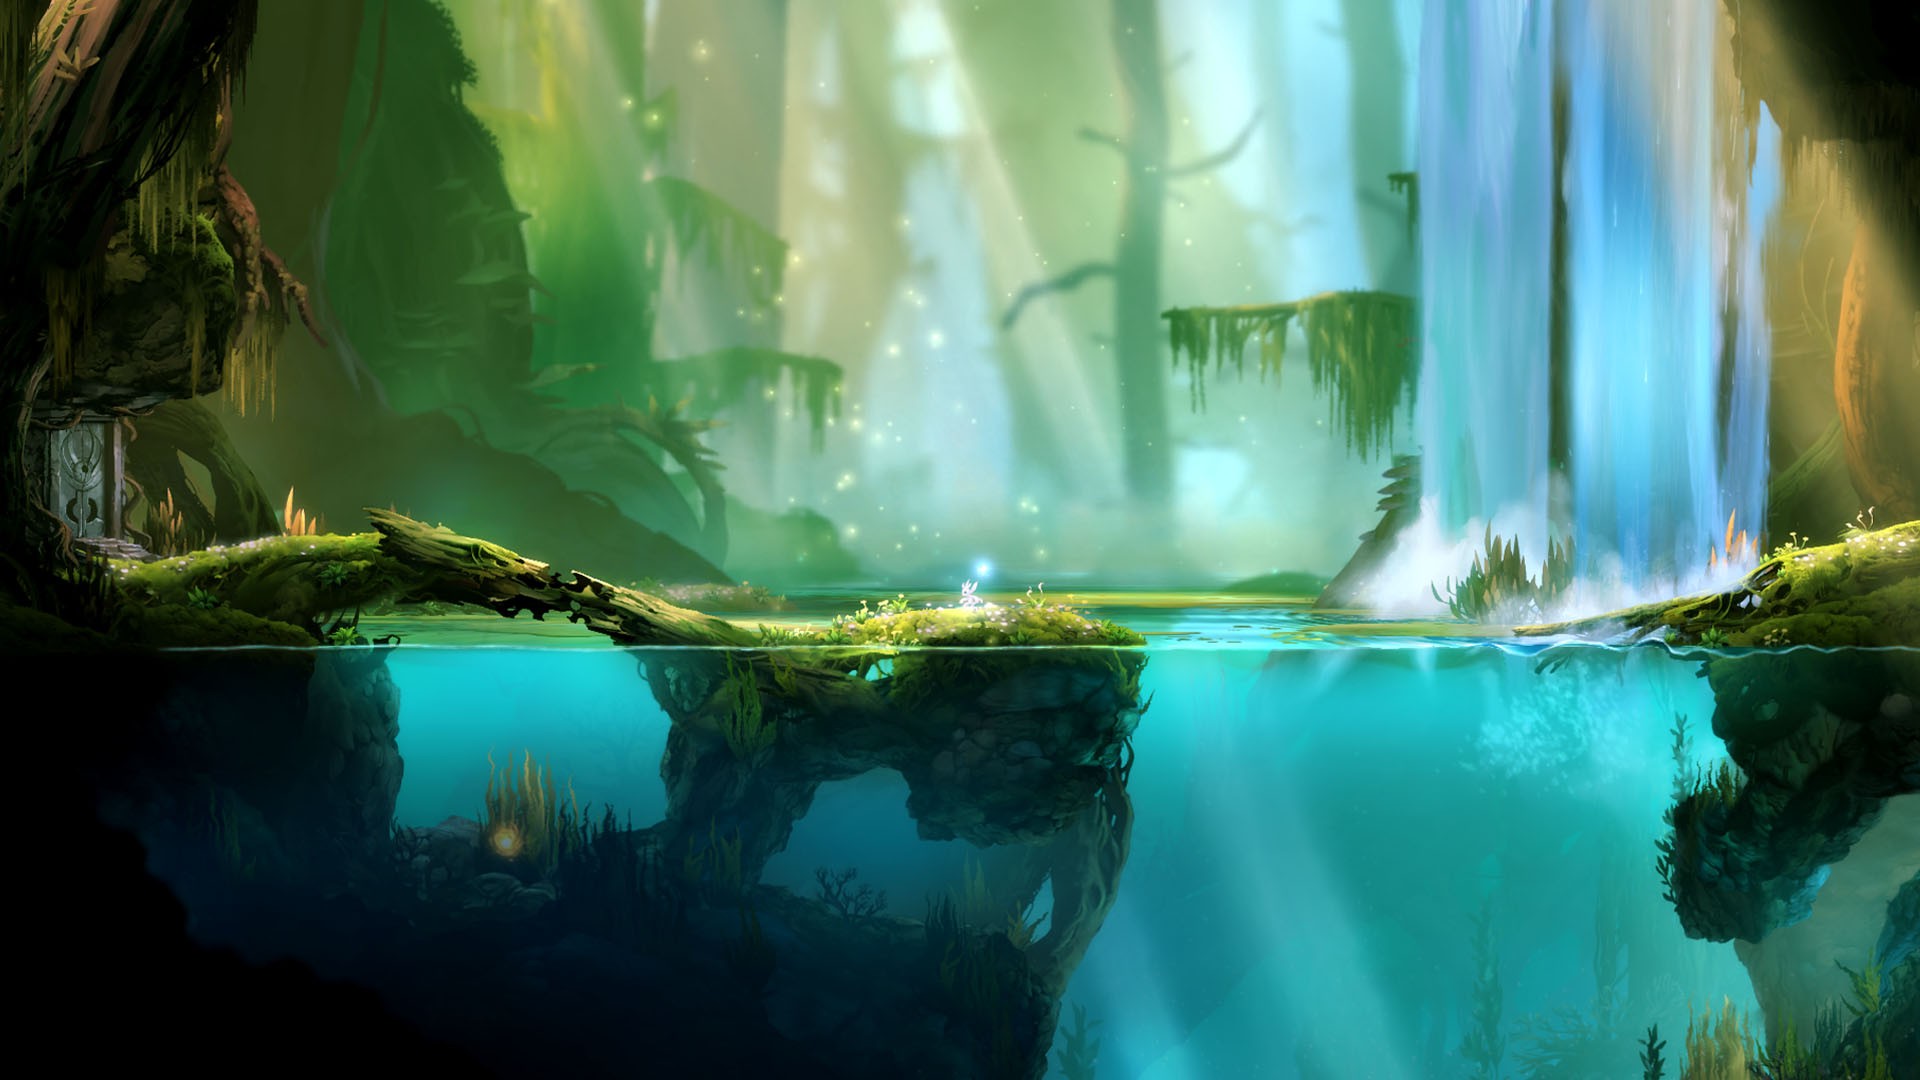 anime, Digital Art, Video Games, Water, Trees, Underwater, Sunlight, Rock, Mist, Fantasy Art, Swamp, Split View, Roots, Forest, Ori And The Blind Forest, Waterfall Wallpaper